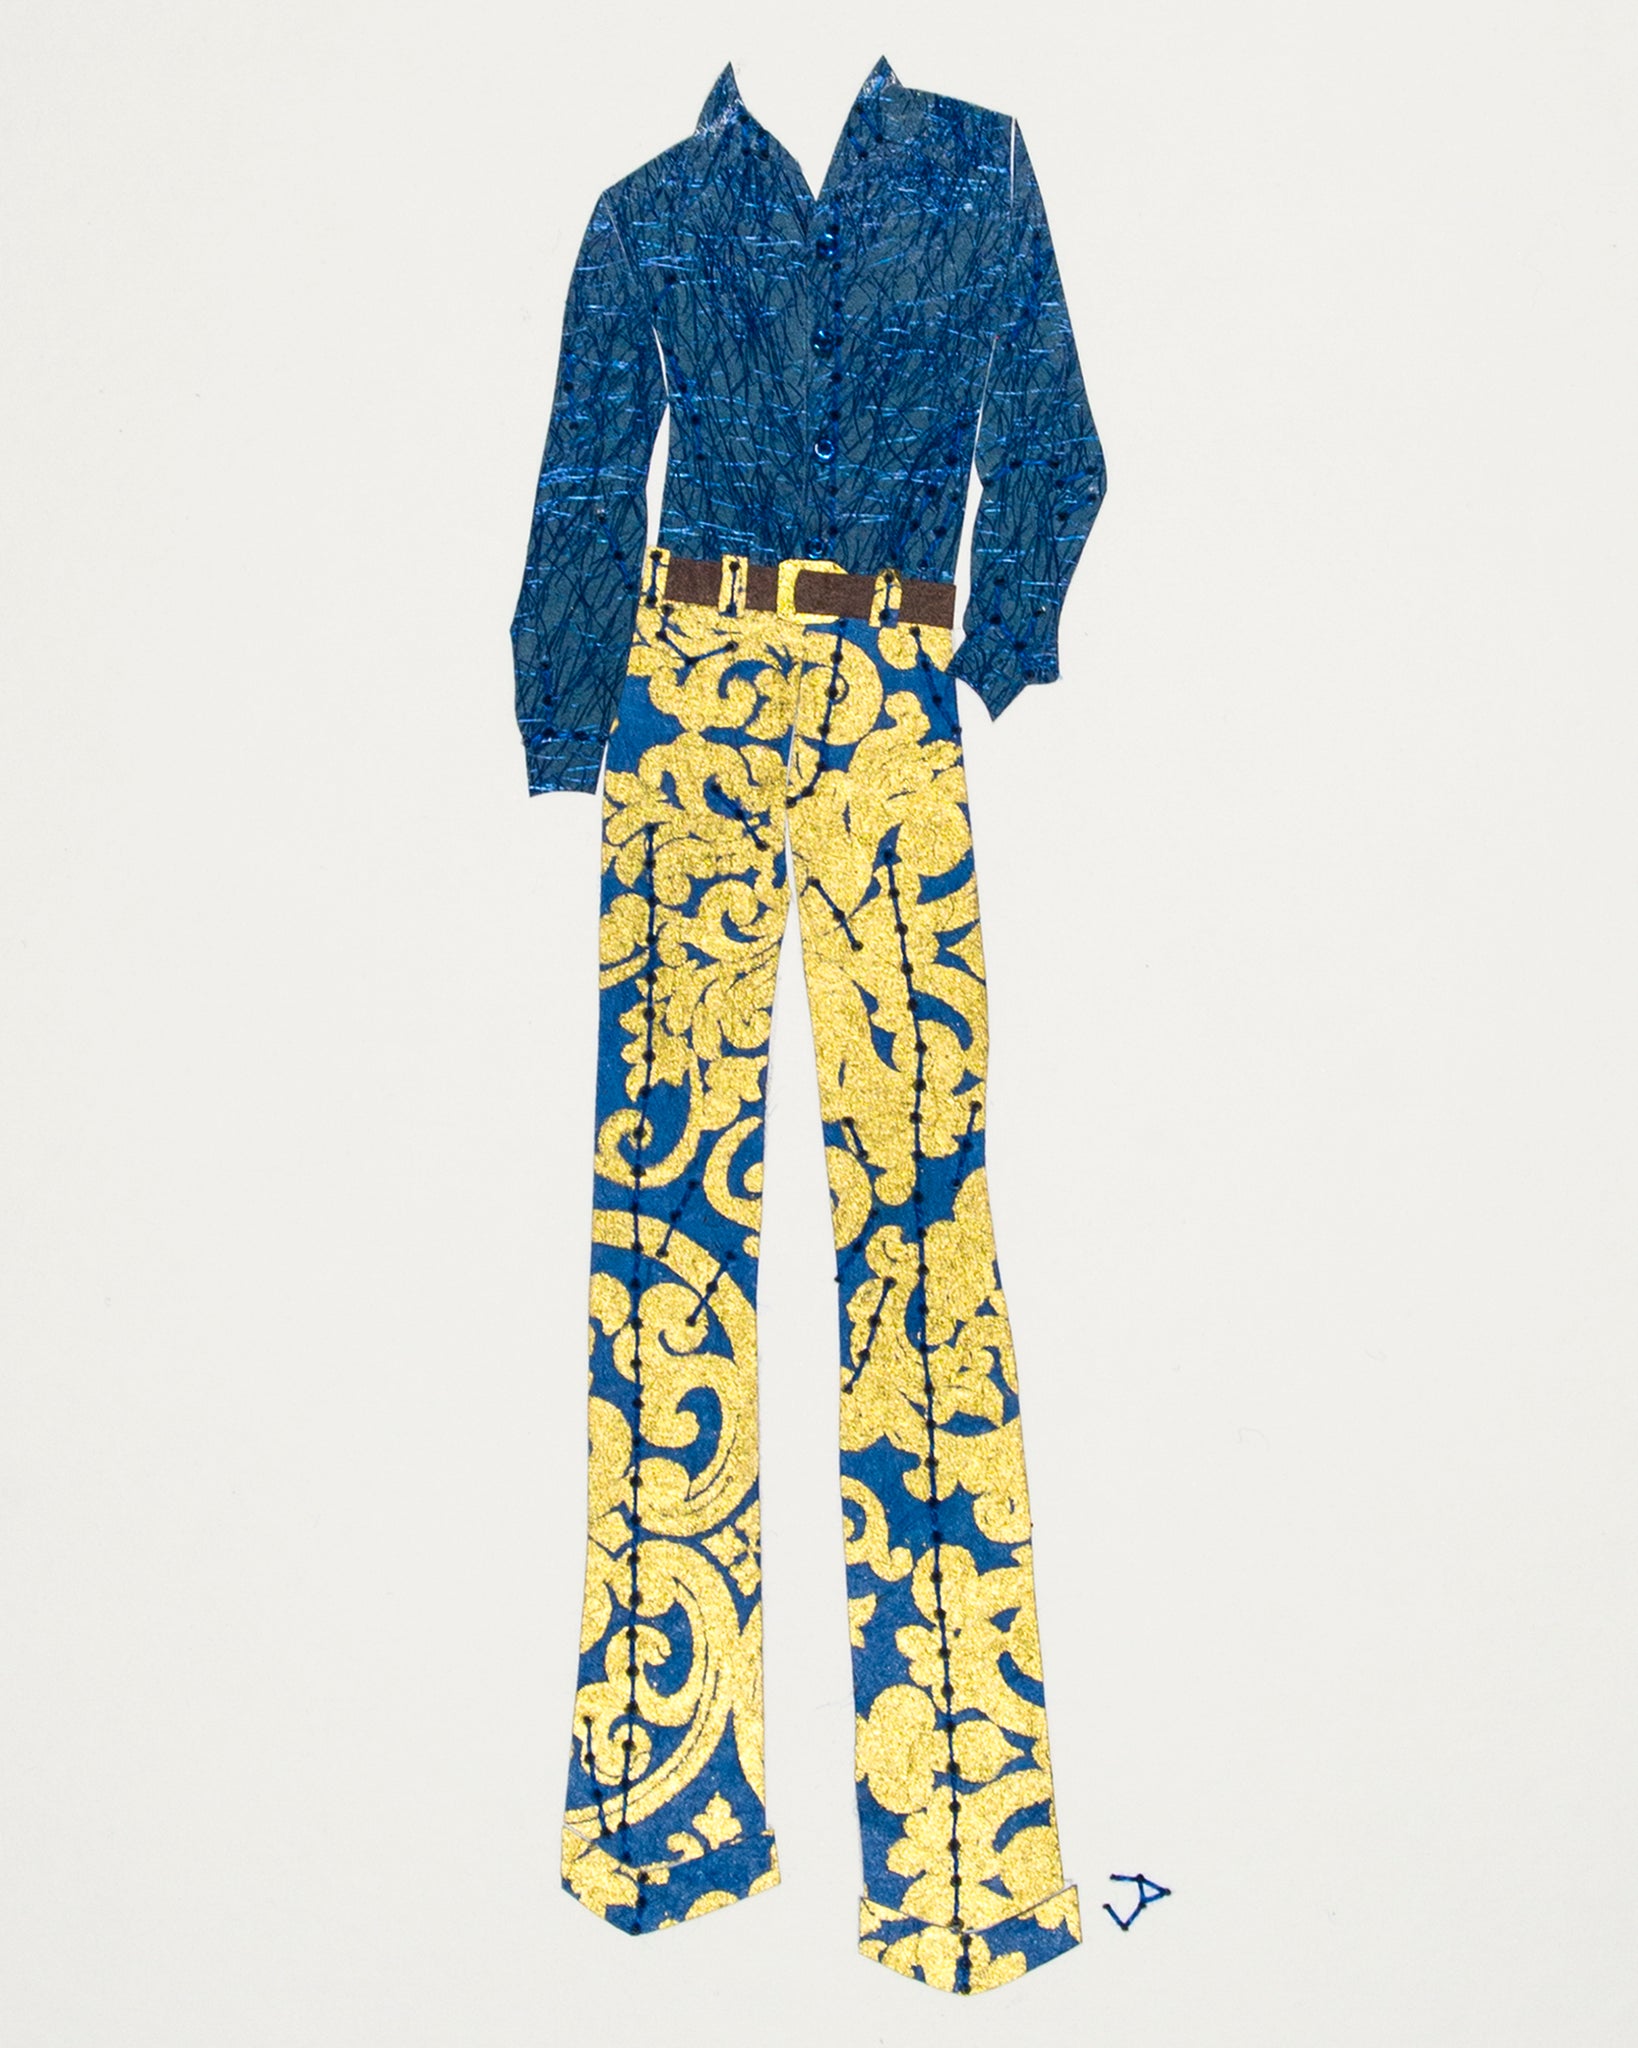 1970s man M04: 1970s men’s blue and gold pants and shirt. 2016